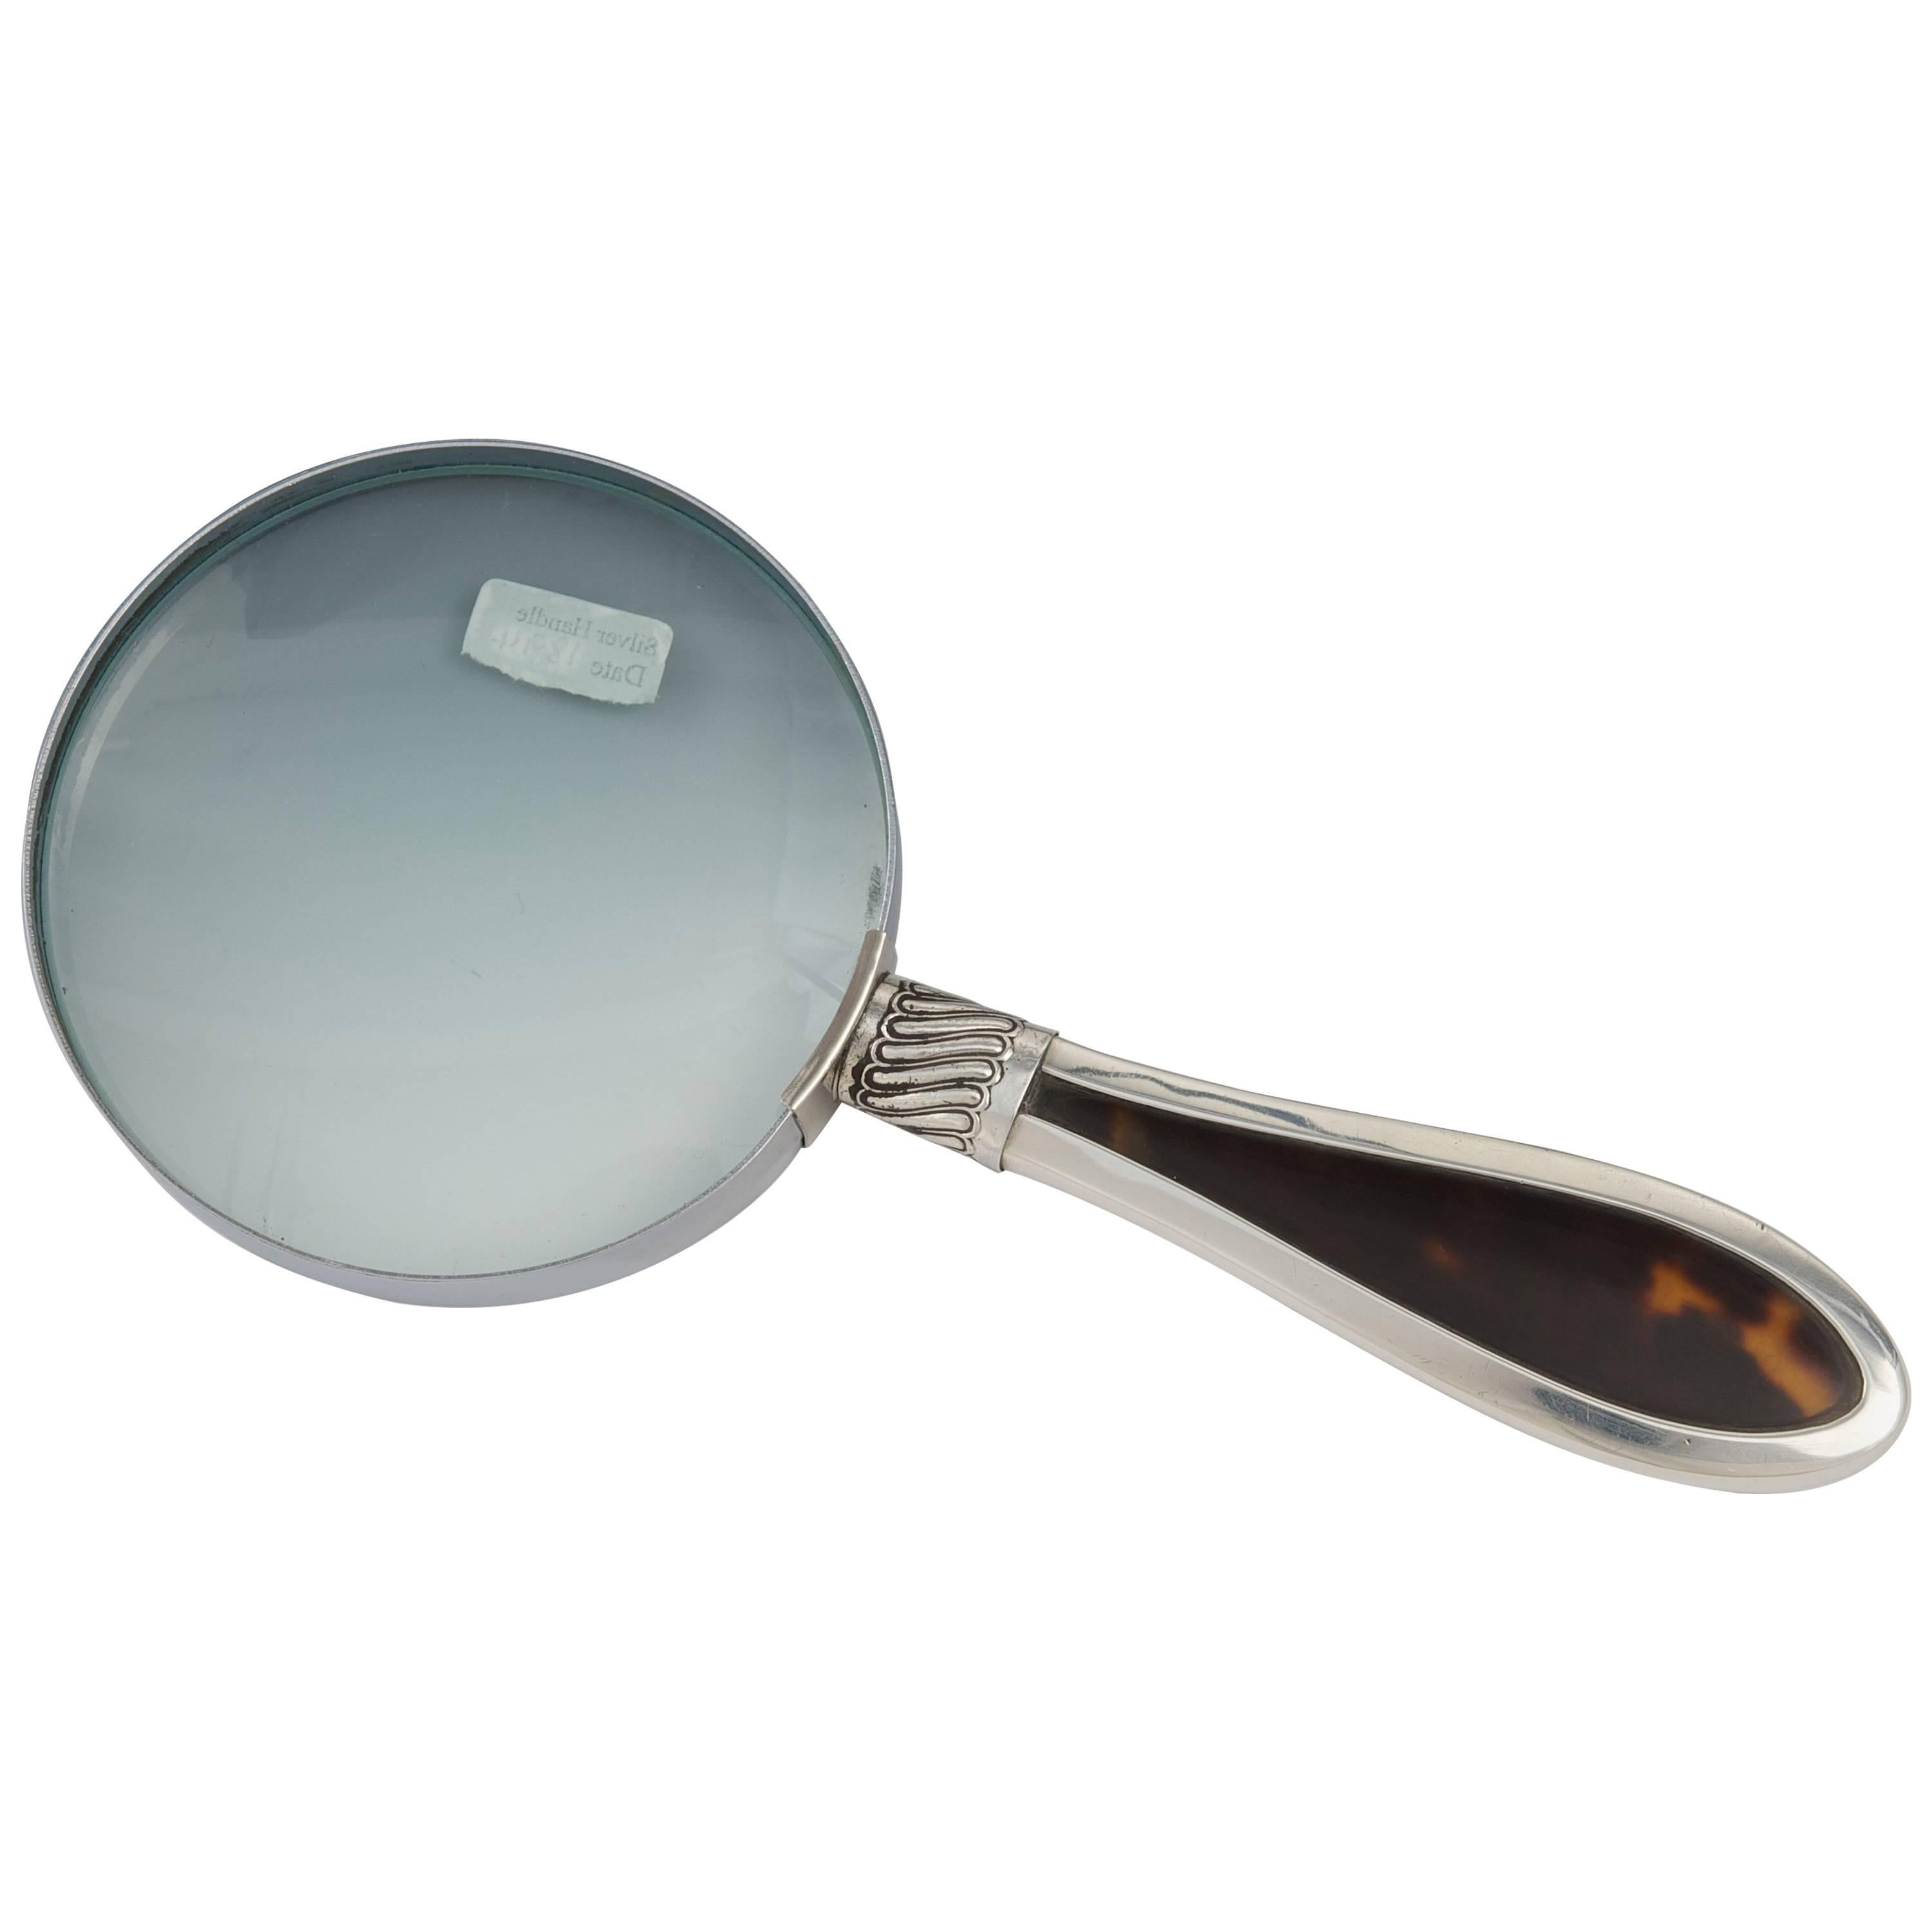 Hilkinson Silver Handled Magnifying Glass with Tortoise Shell Inset For Sale